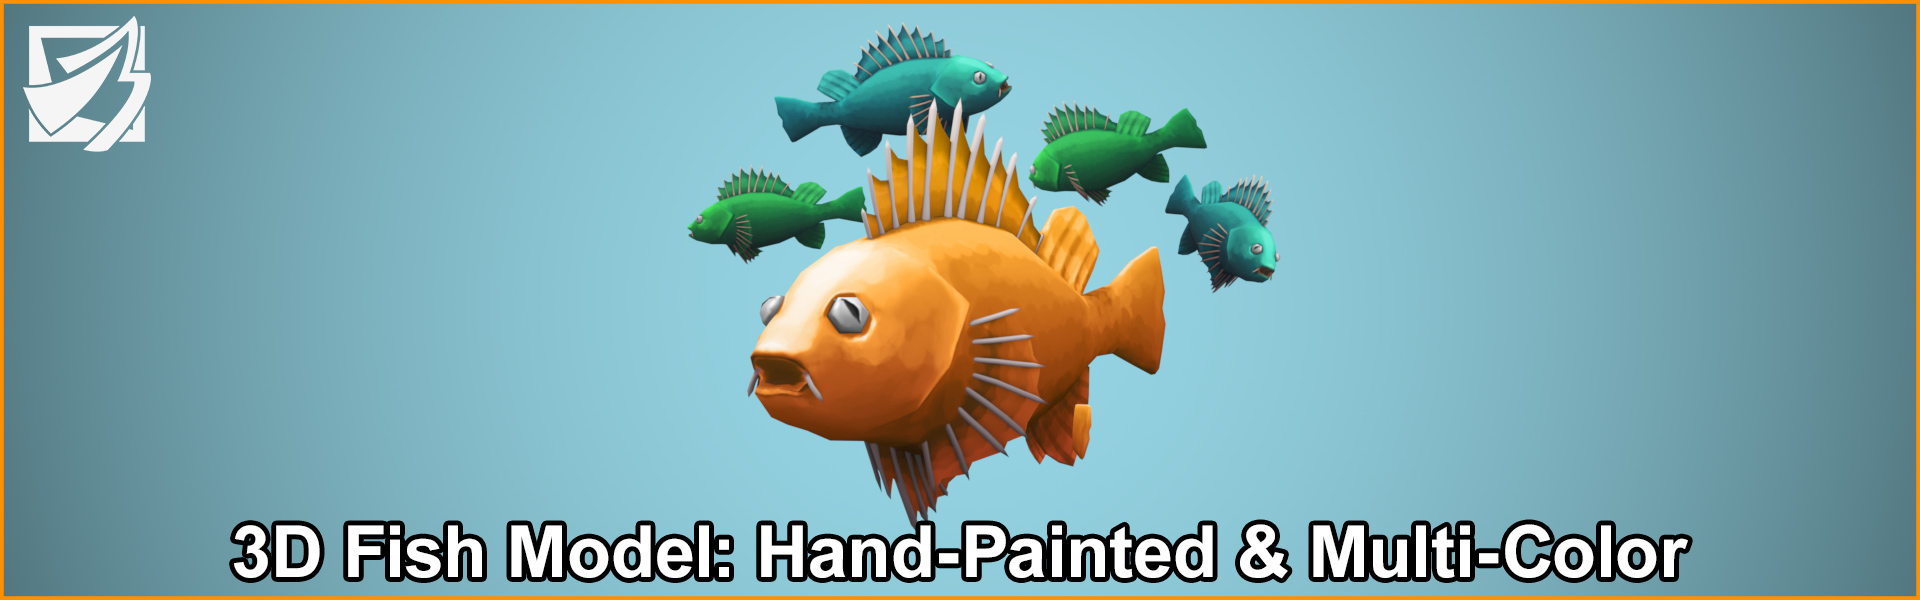 3D Fish Model: Hand-Painted & Multi-Color